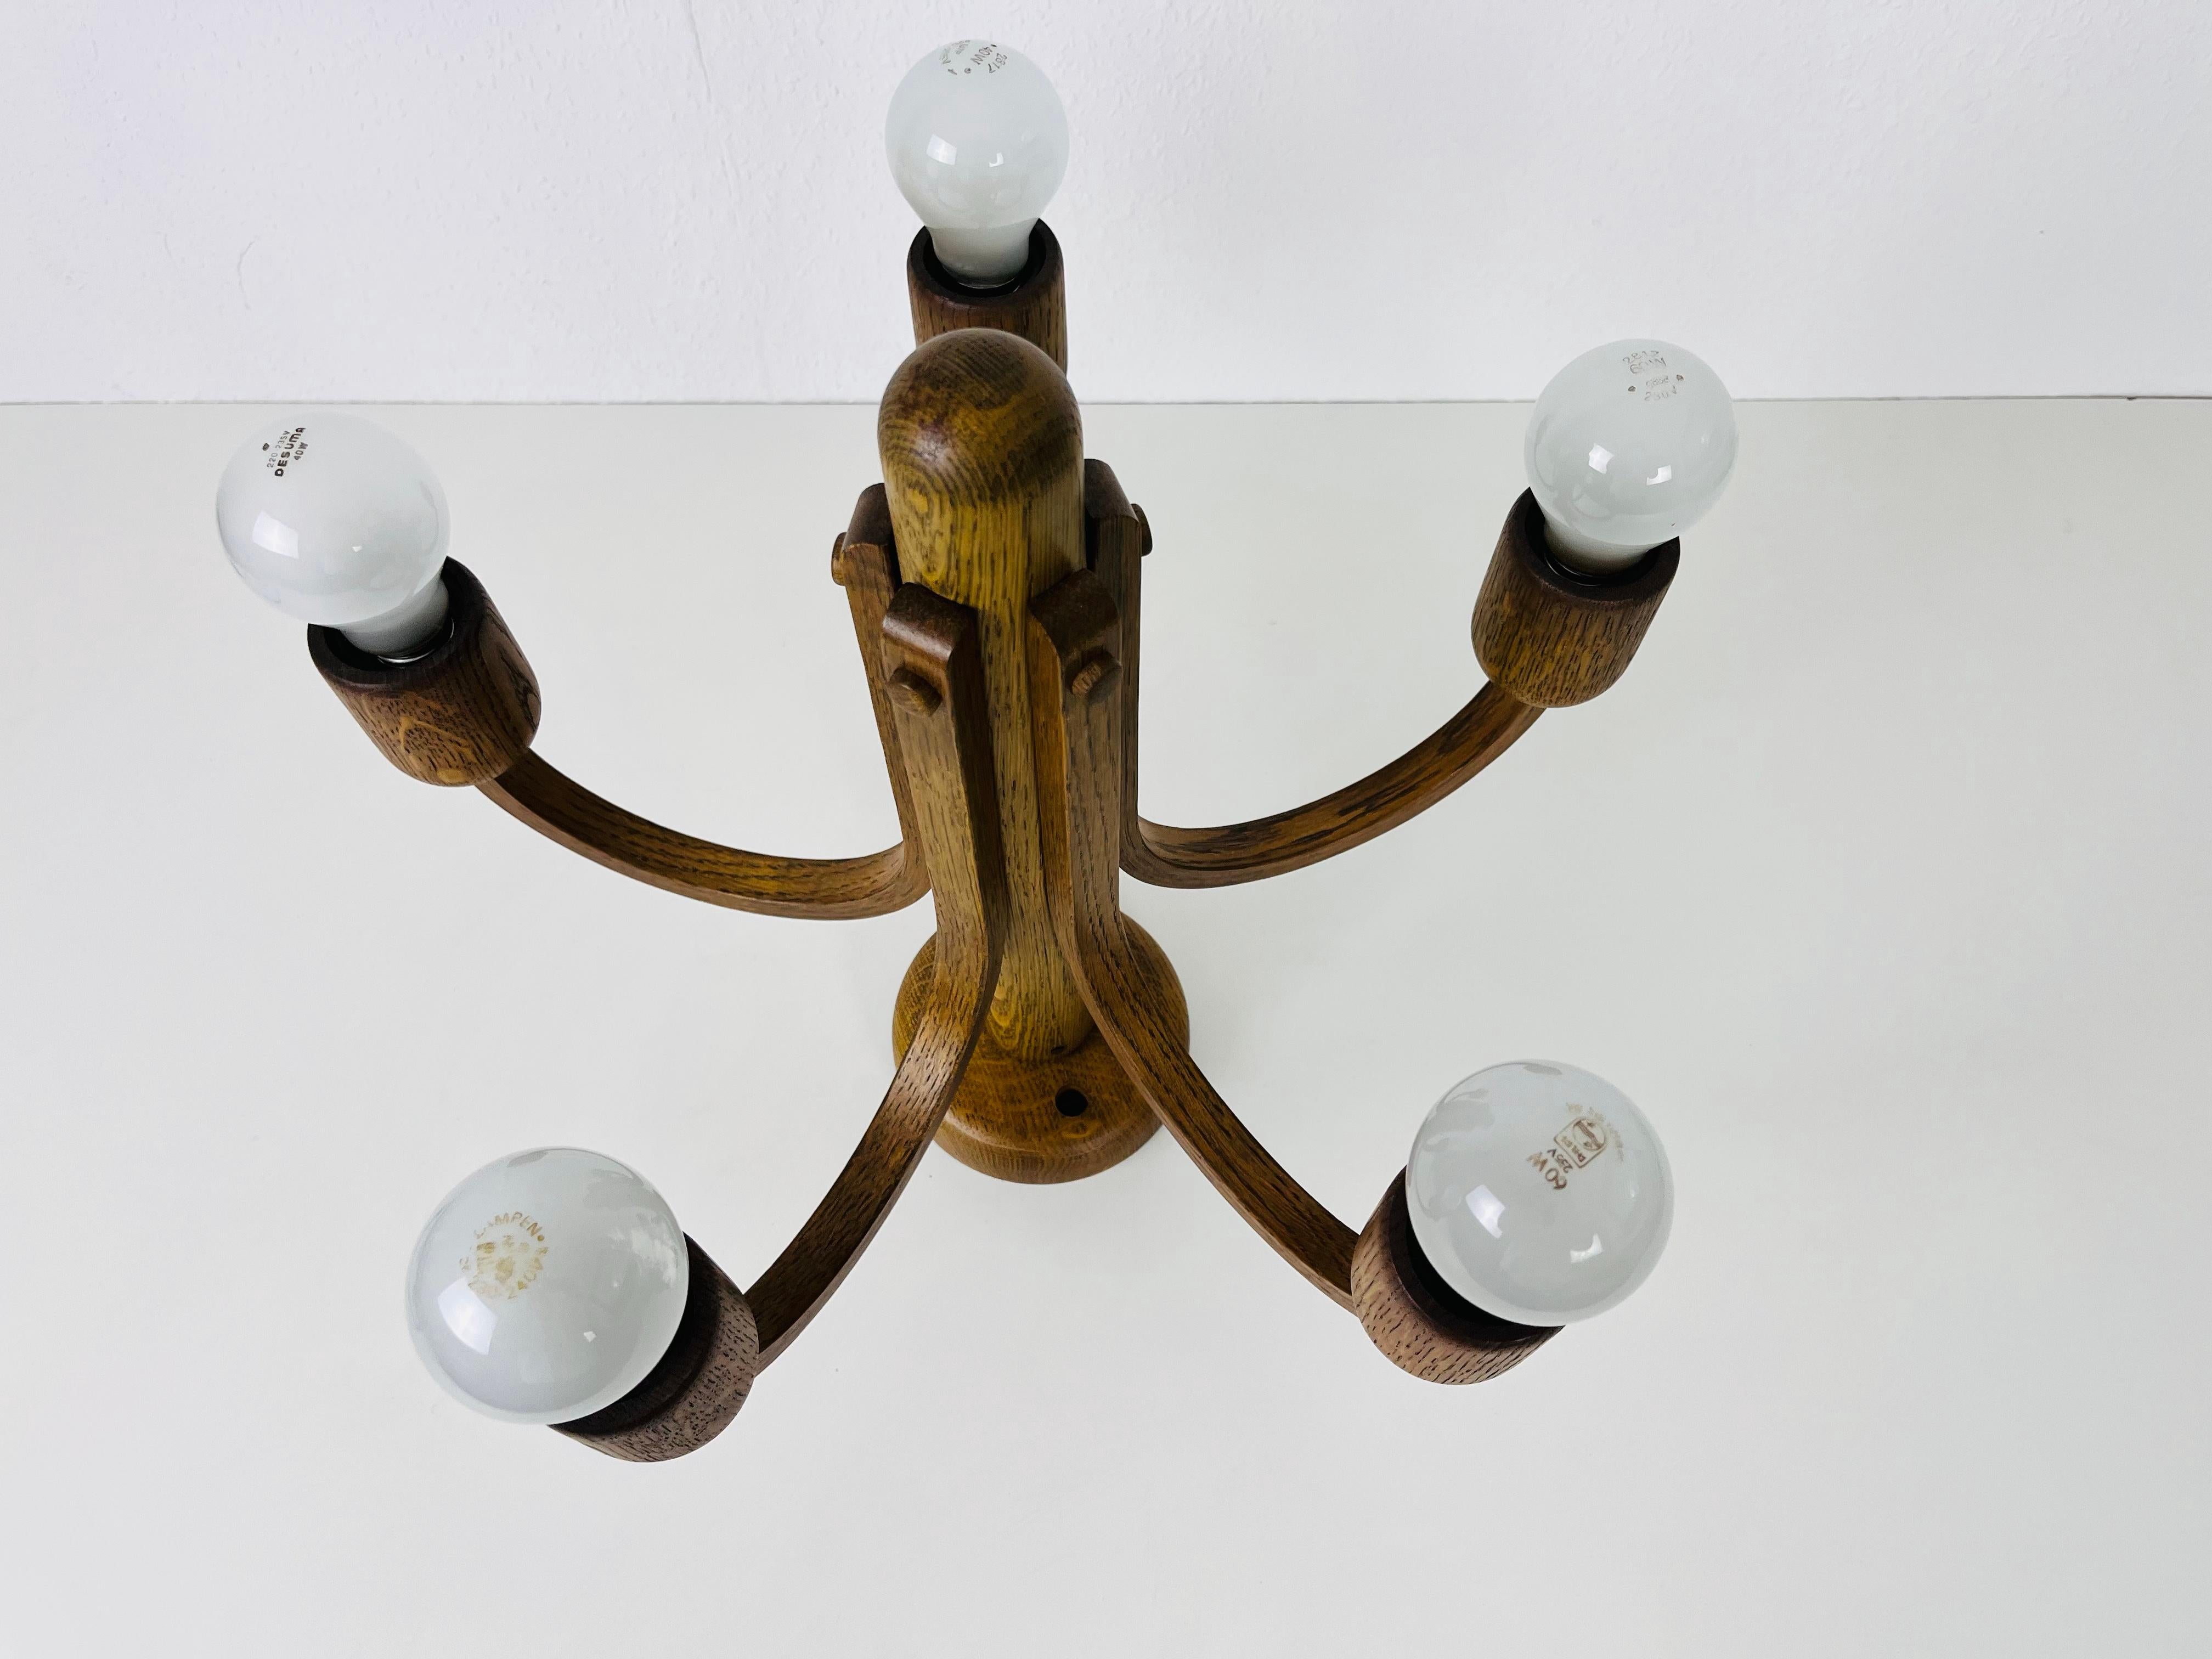 Midcentury Wooden Pendant Lamp with 5 Arms by Domus, 1960s For Sale 2